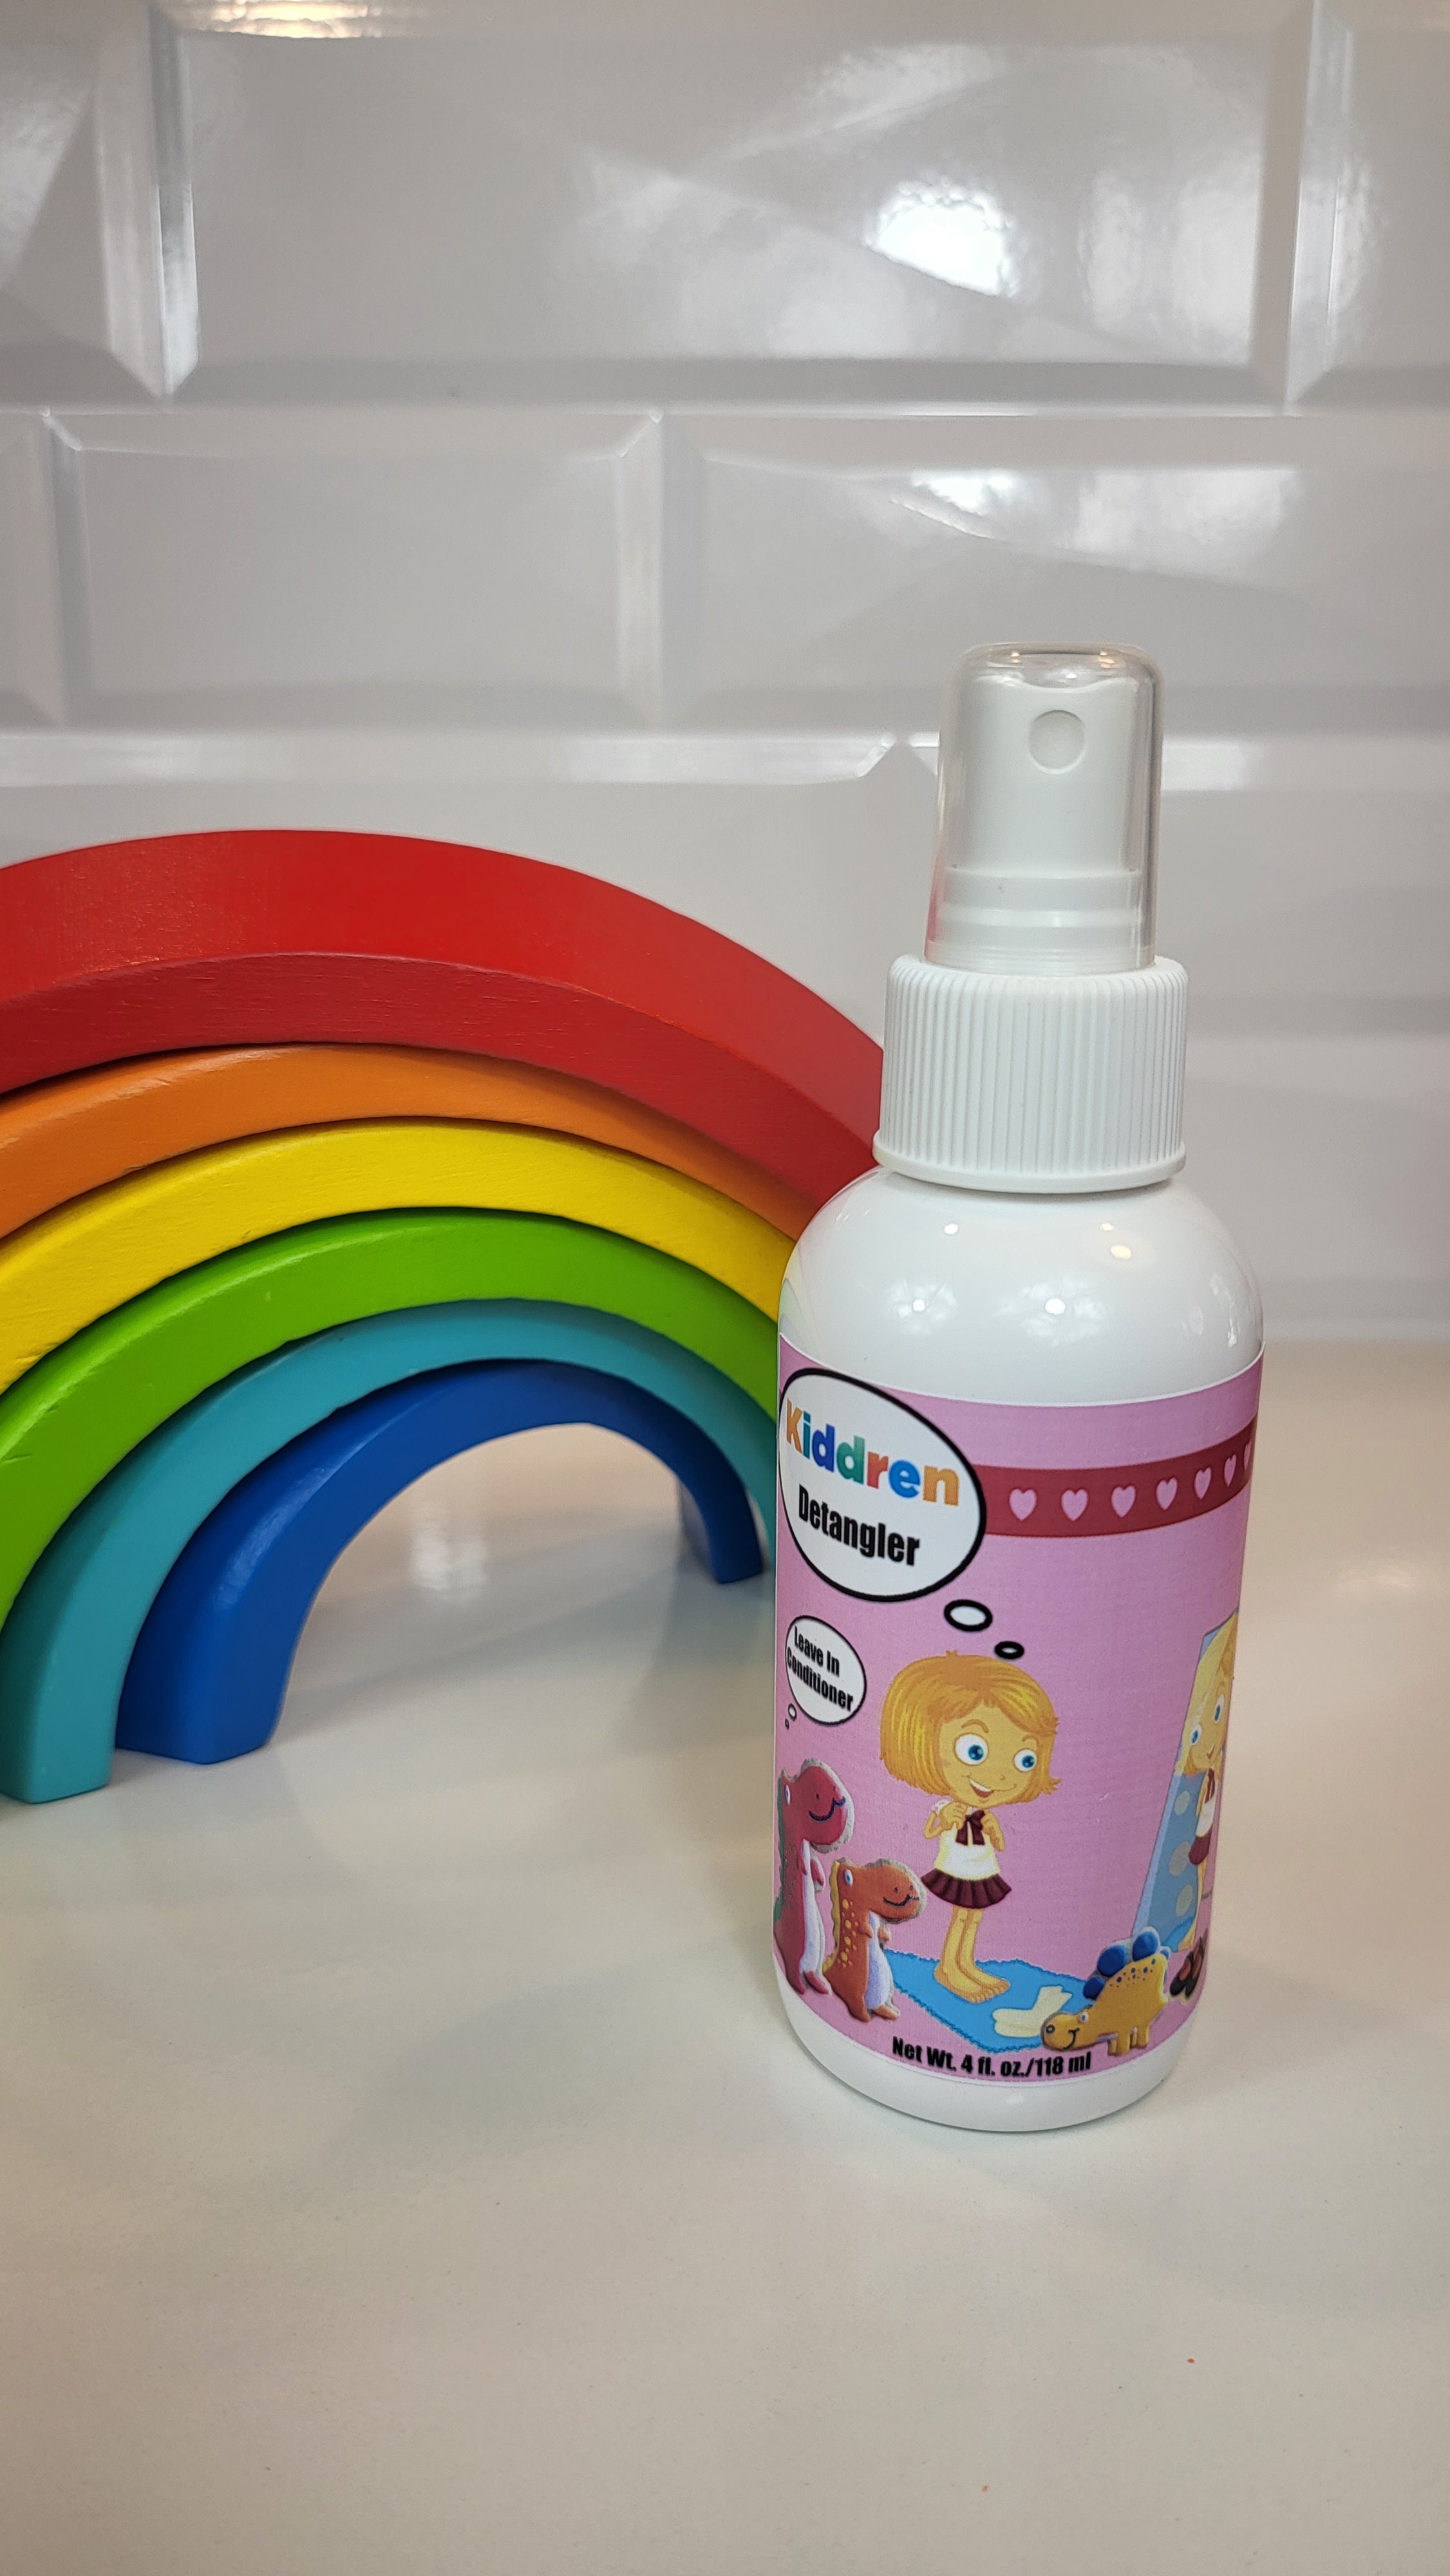 Kiddren Detangler 4 ounce for kids for removing knots and tangles and is a leave in conditioner